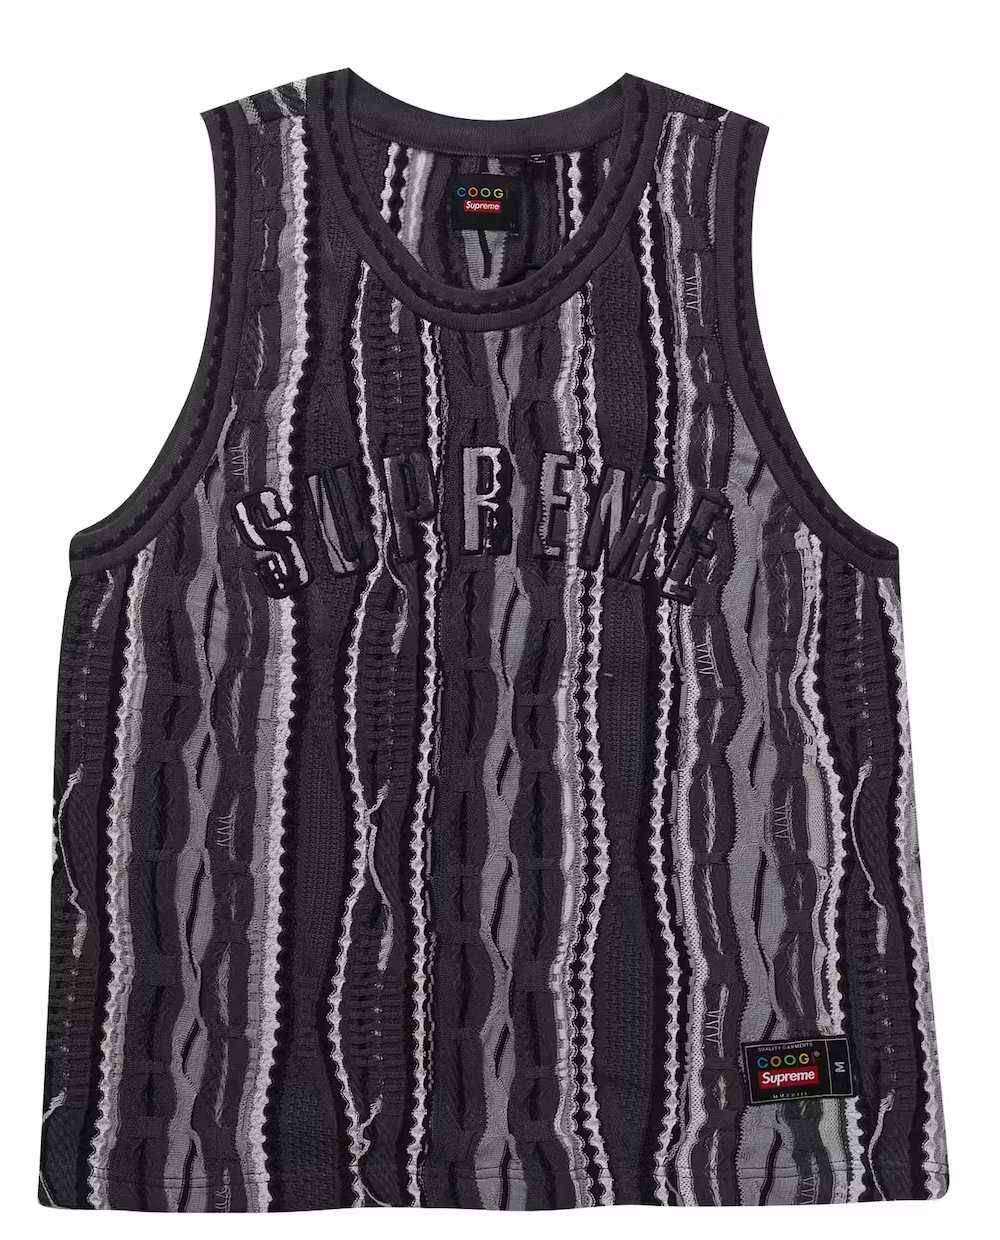 Supreme Coogi Basketball Jersey Black in Gray   Lyst